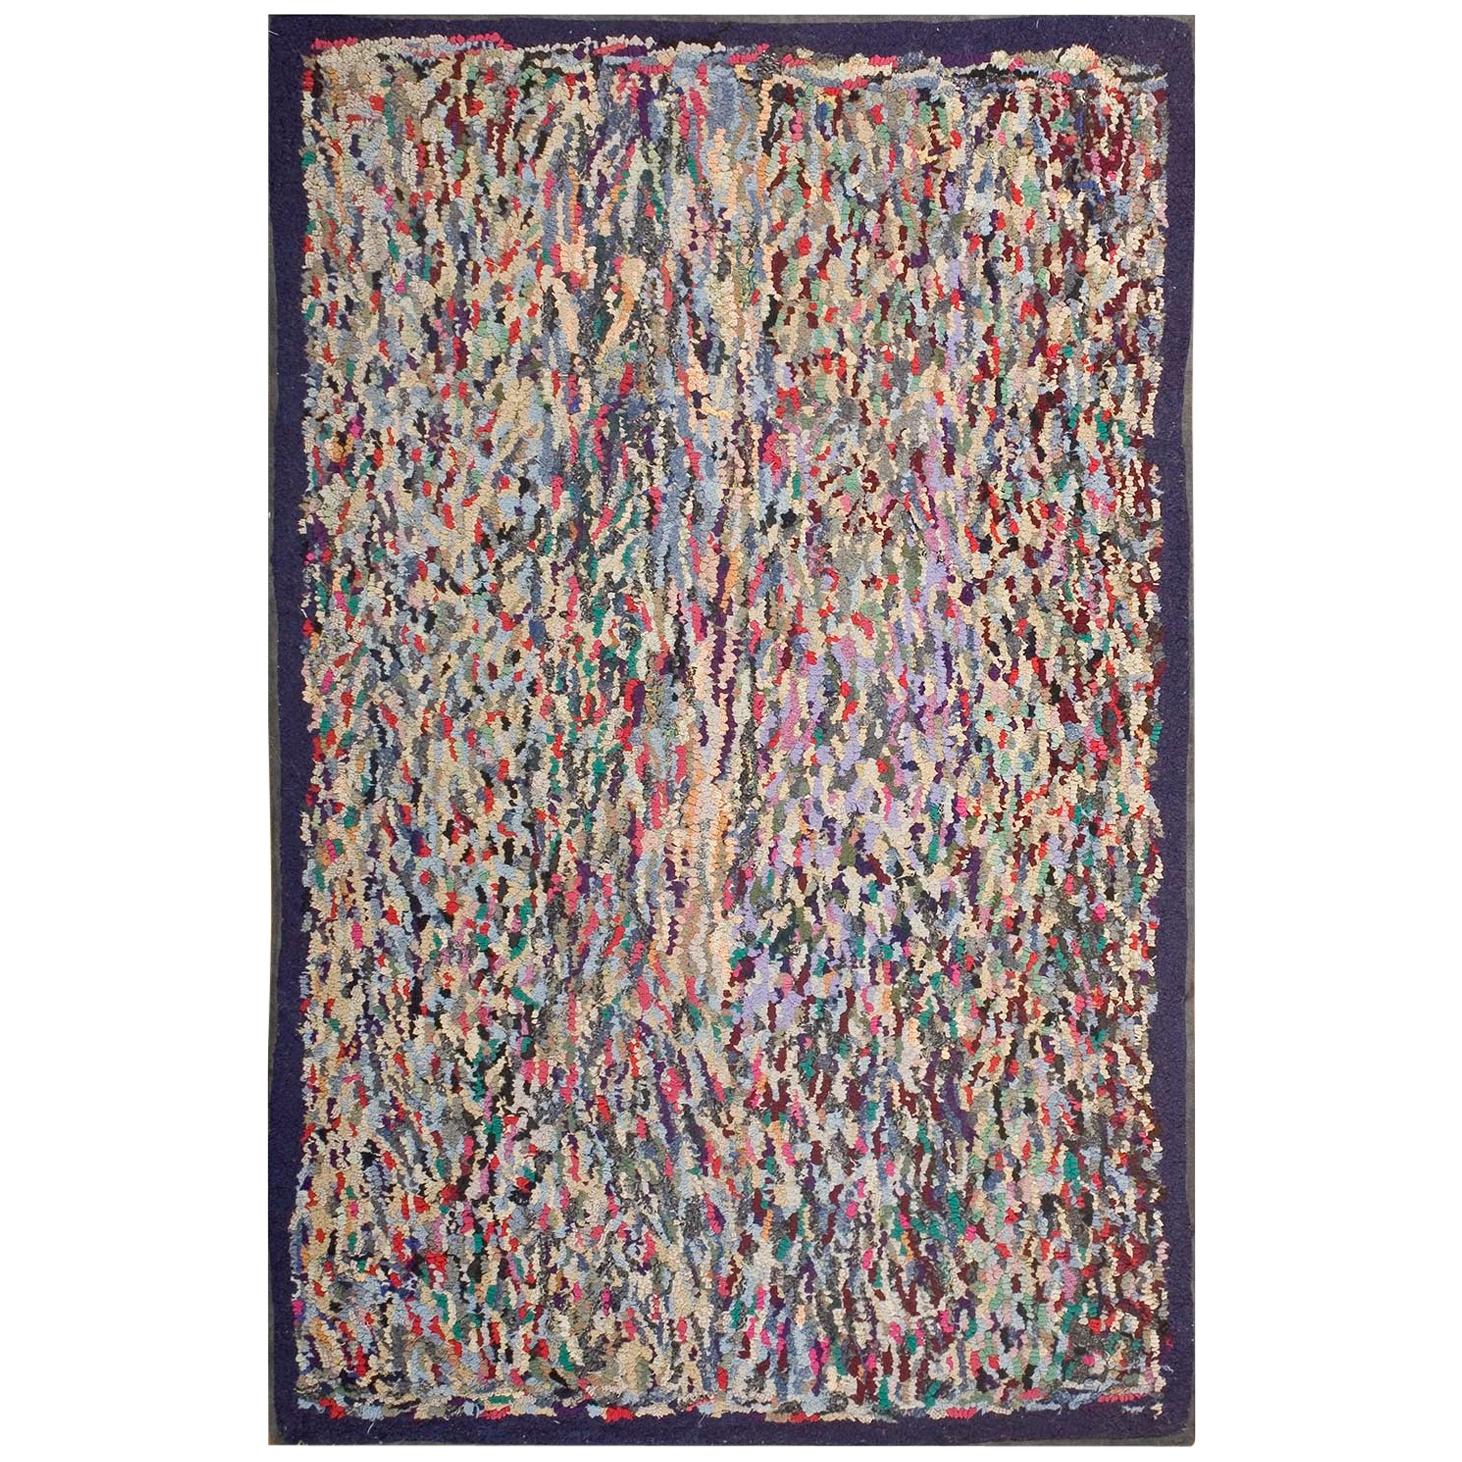 Antique American Hooked Rug 3' 0" x 4' 10" 